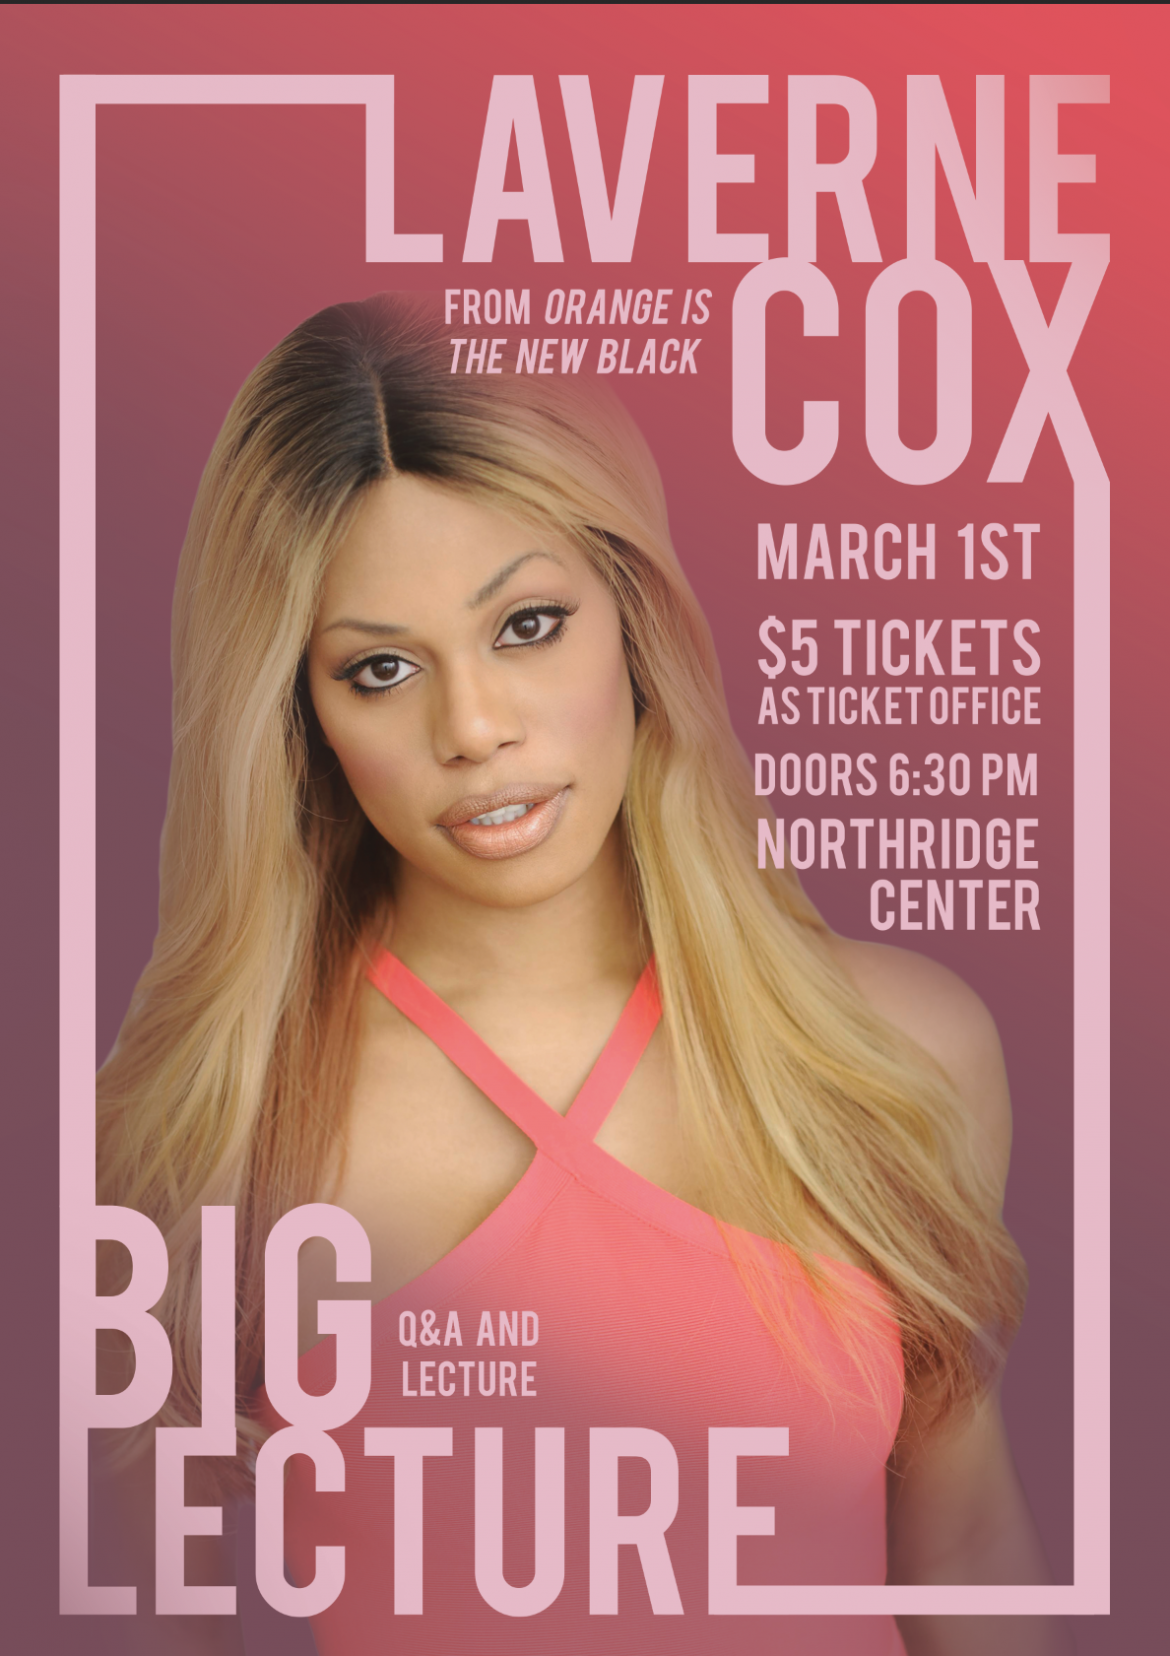 Poster promoting a Laverne Cox lecture